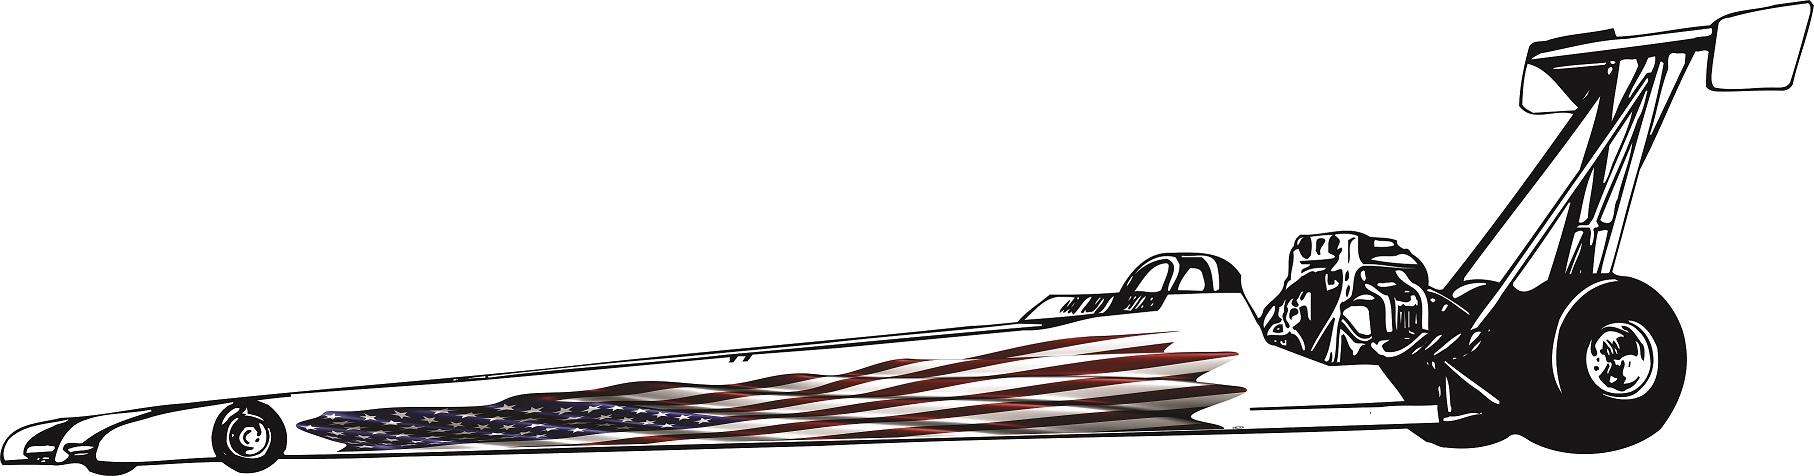 American Flag Race Jr. Dragser Graphics set Fit all Styles